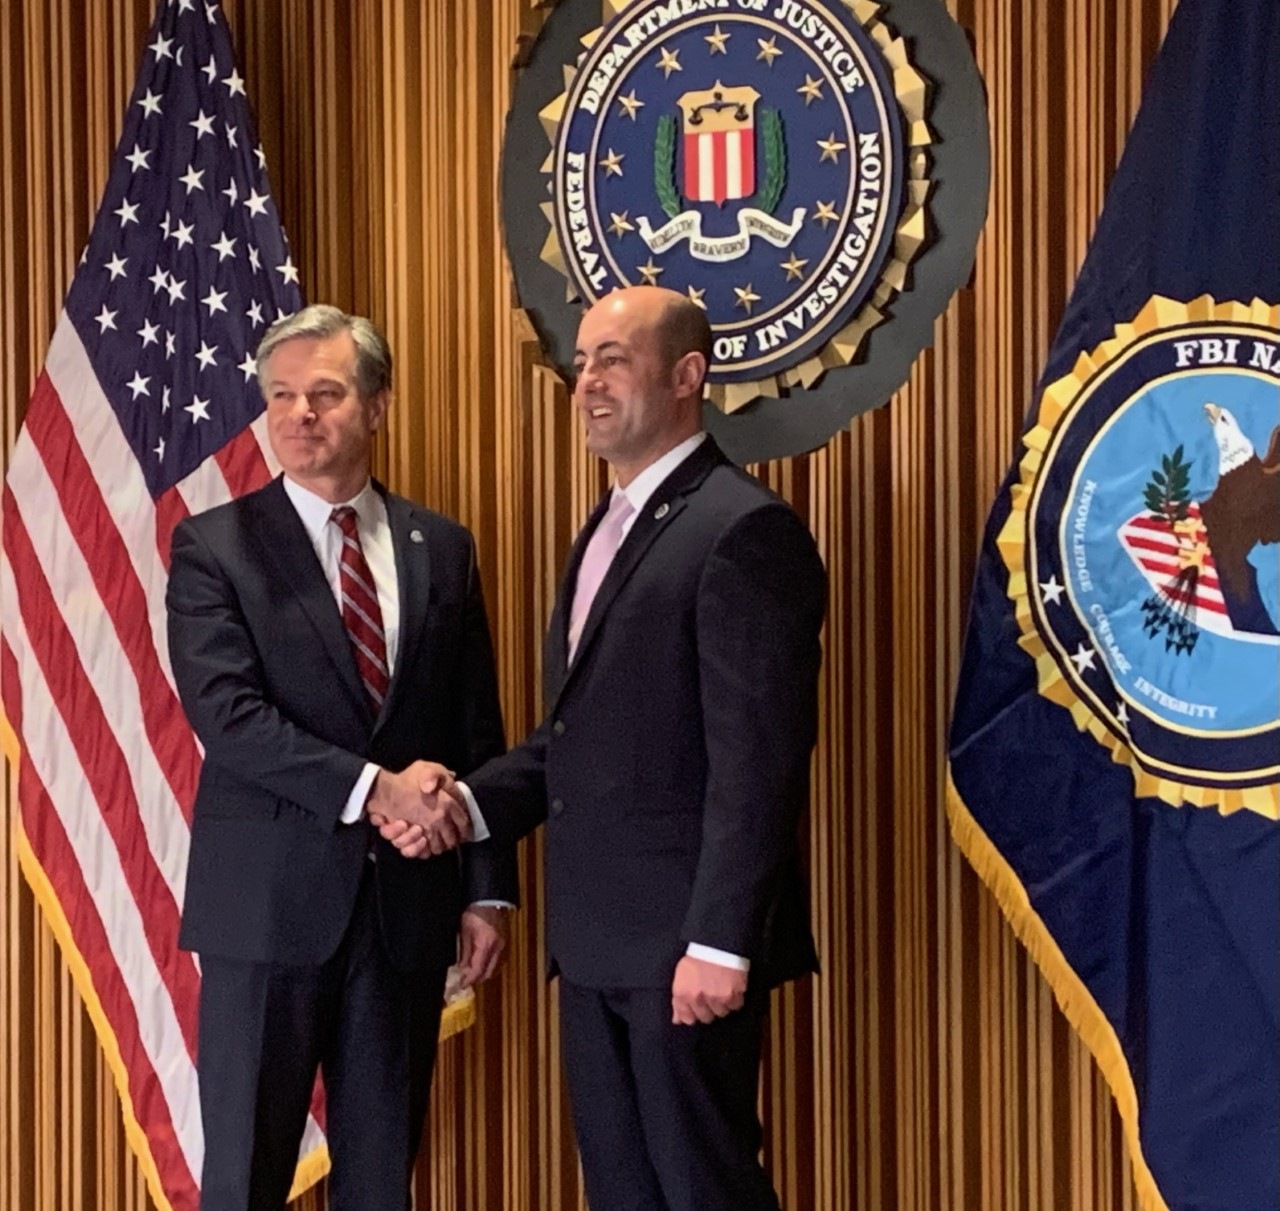 NA Grad Tom Kelly: Schenectady Police Lieutenant Tom Kelly pictured with FBI Director Christopher Wray at the graduation ceremony for the FBI National Academy's 280th Session.